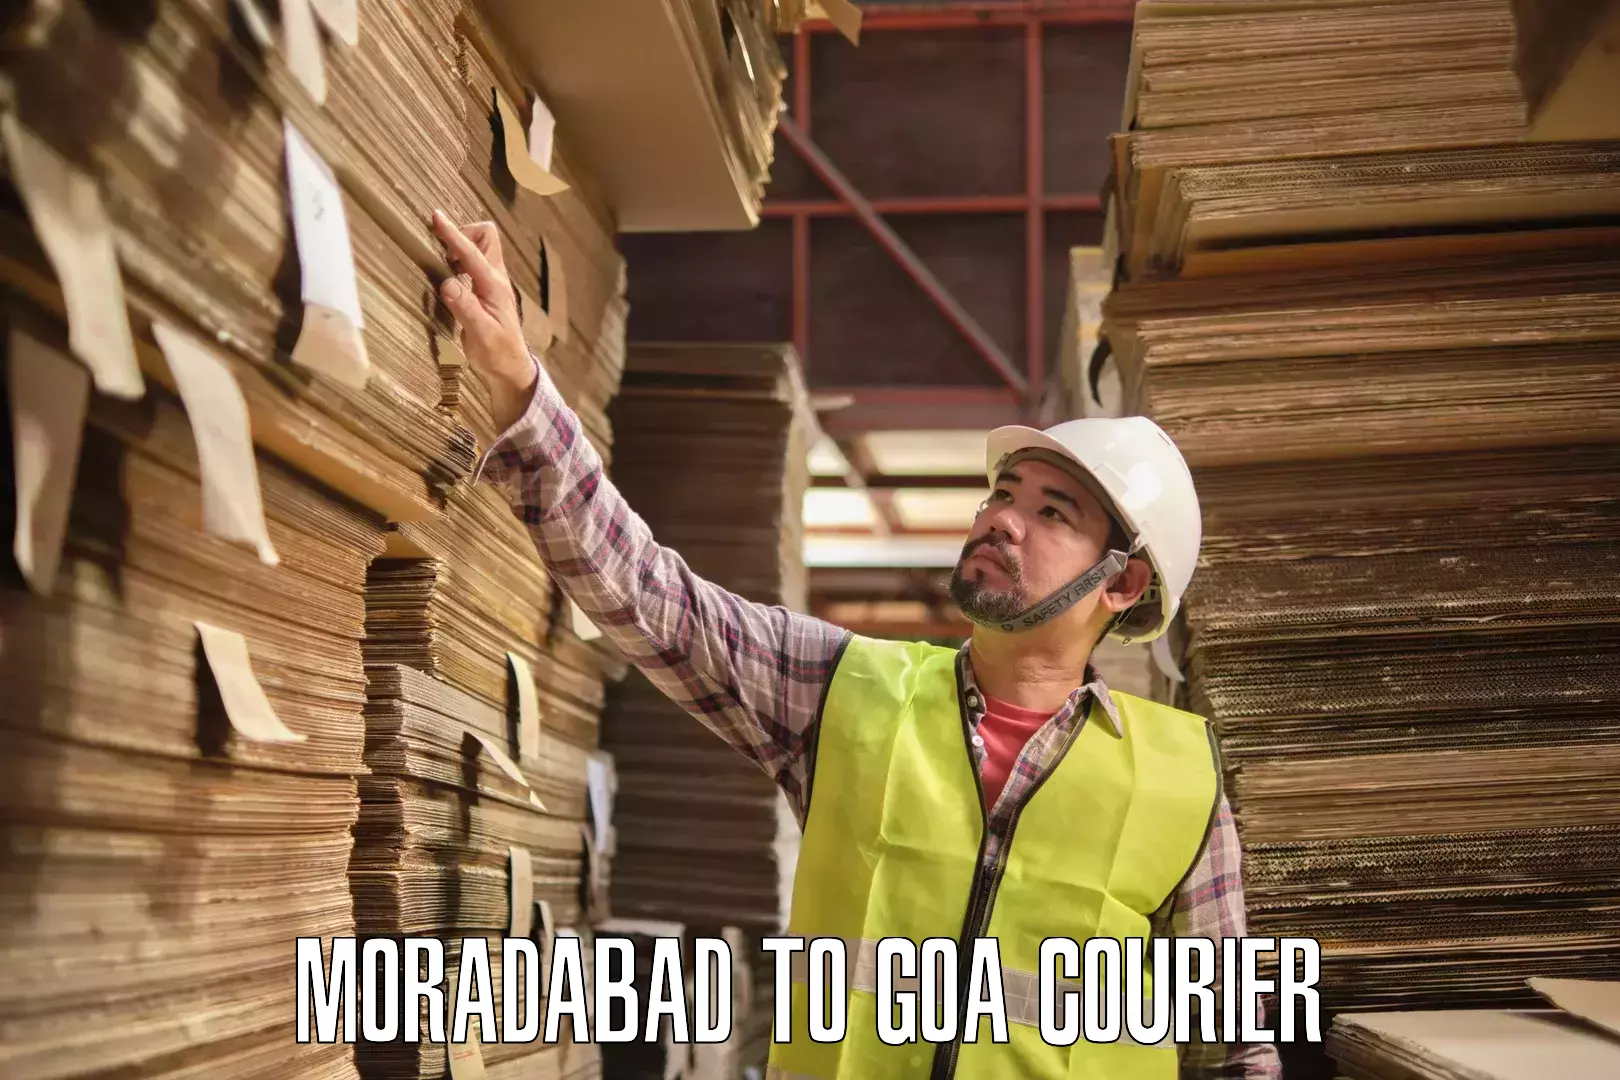 Enhanced shipping experience in Moradabad to South Goa